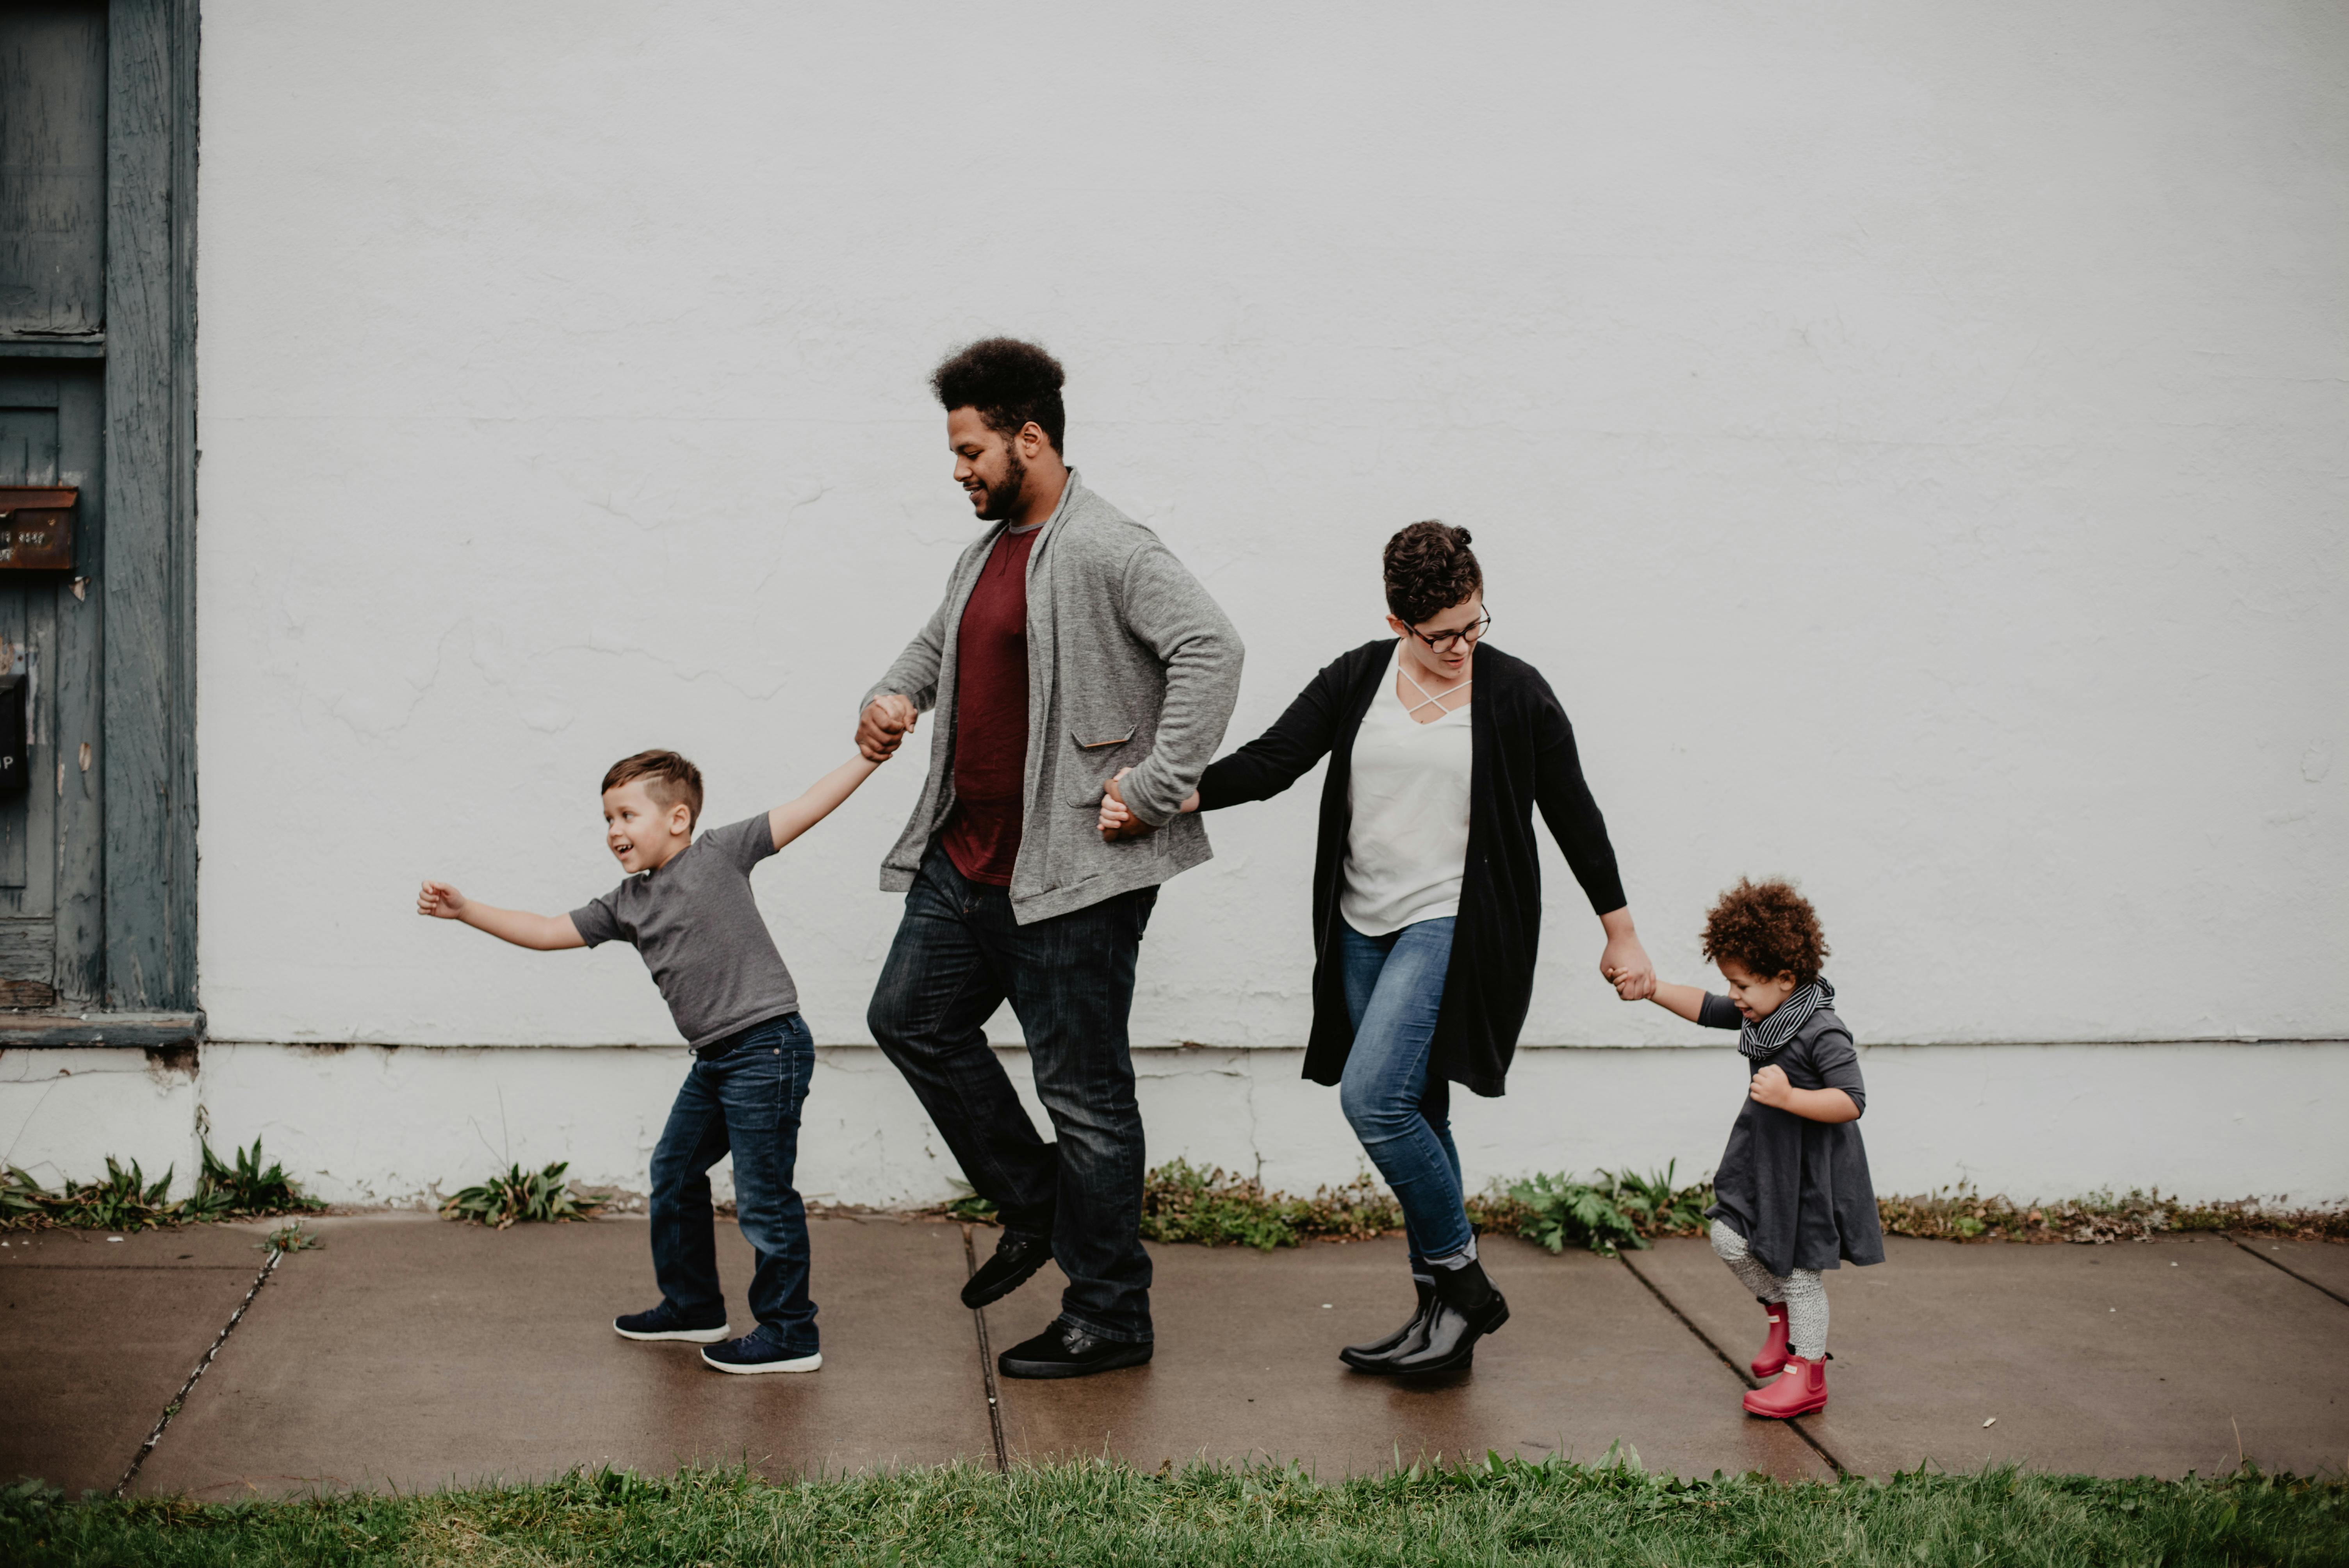 A family of four walking down the street | Source: Pexels